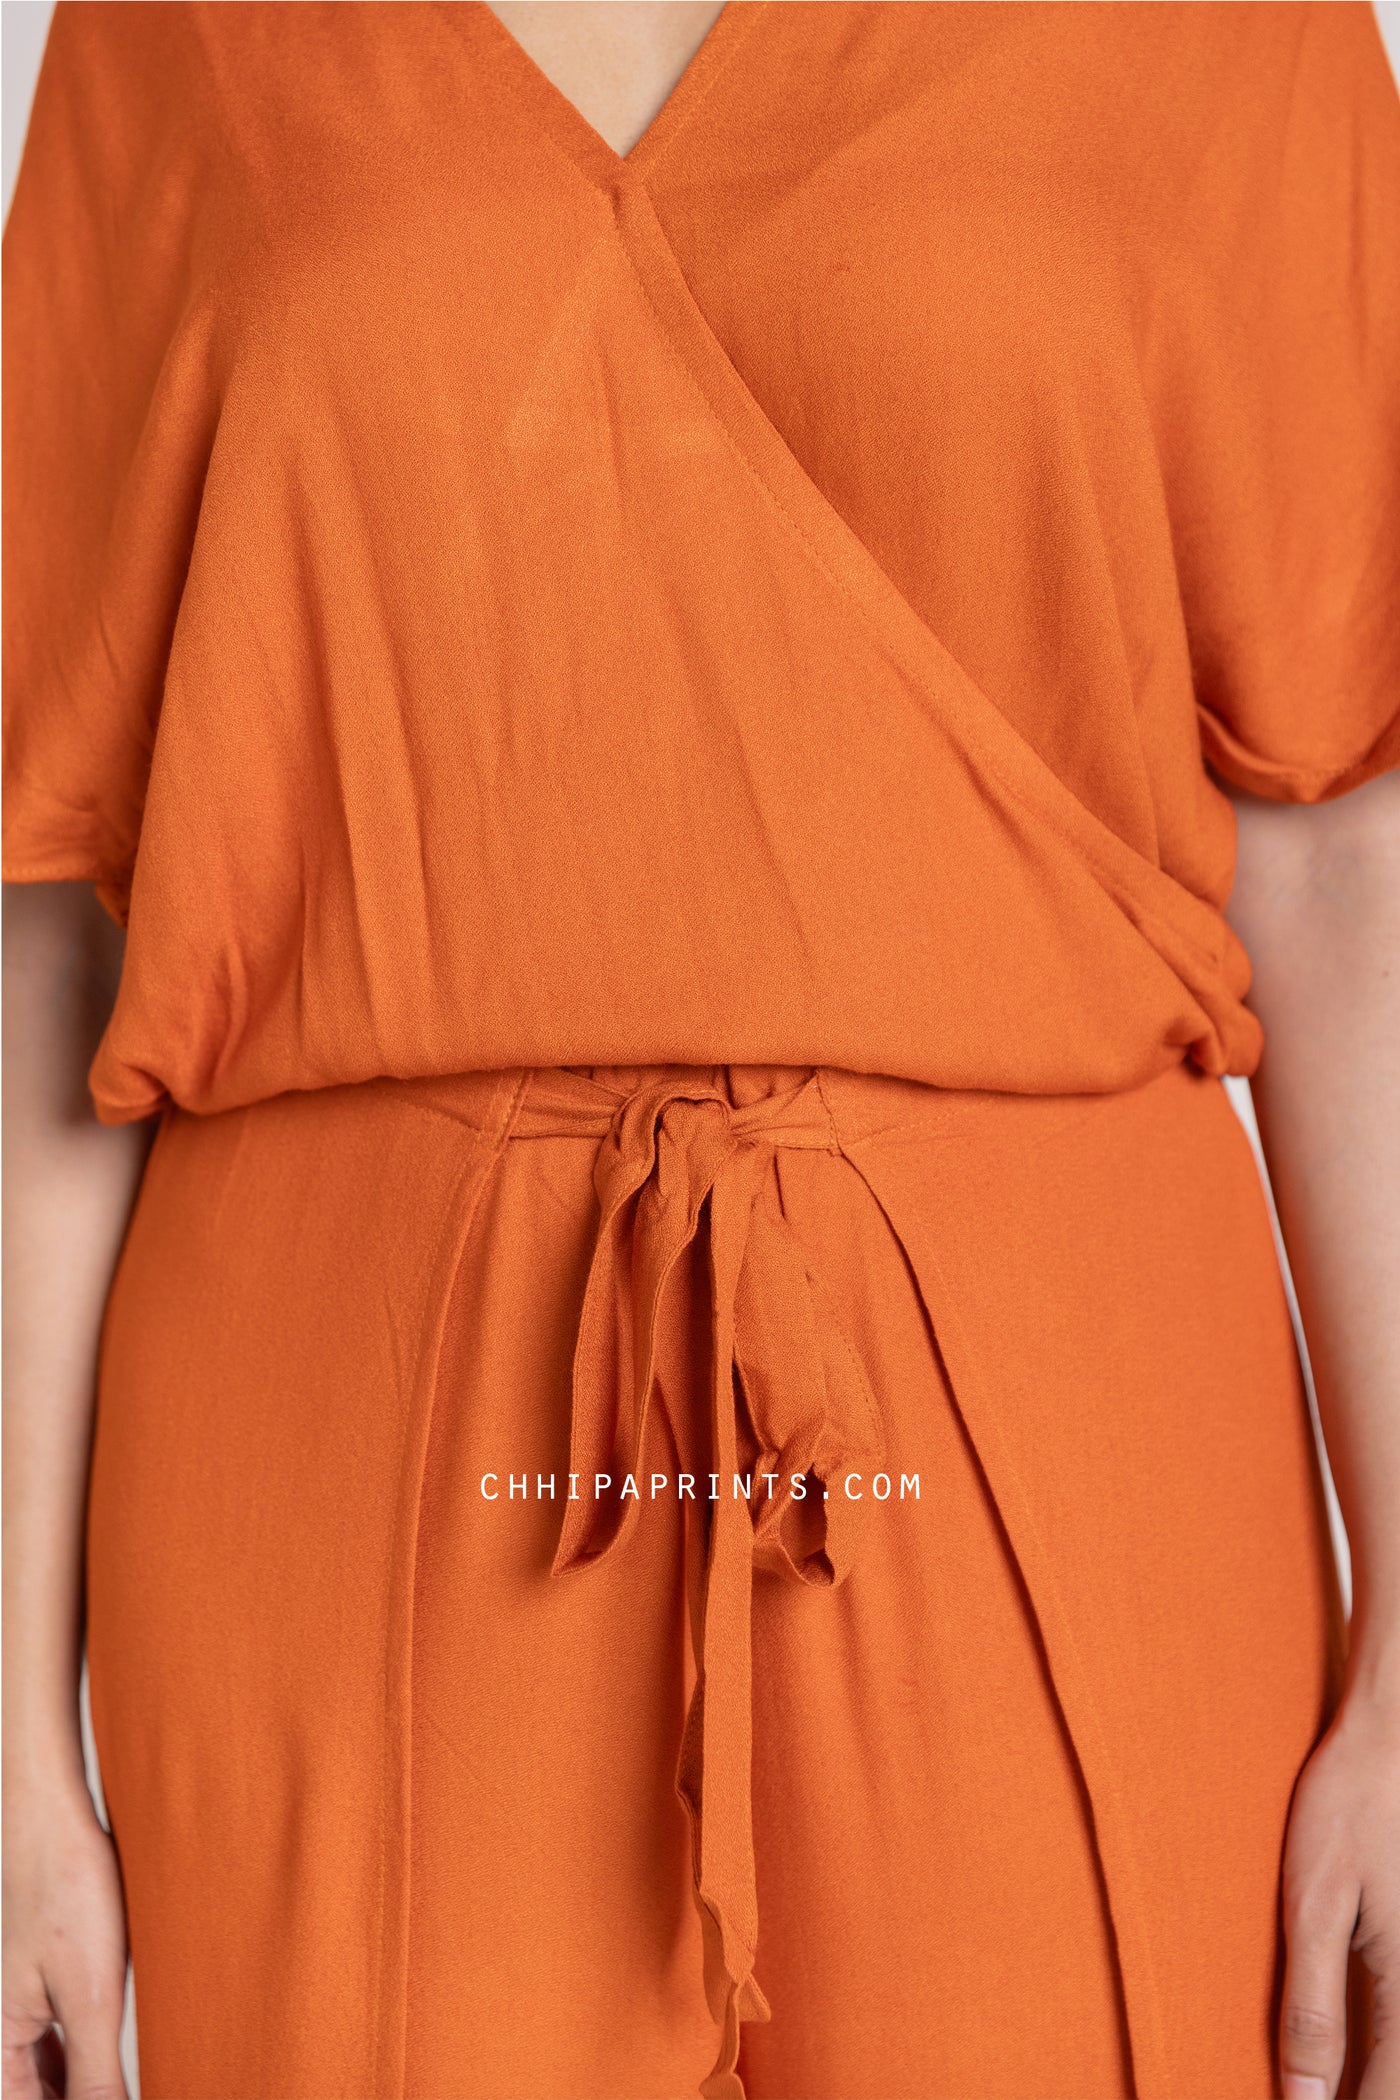 Cotton Modal Wrap Top and Pants Co Ord Set in Solid Shades of Orange